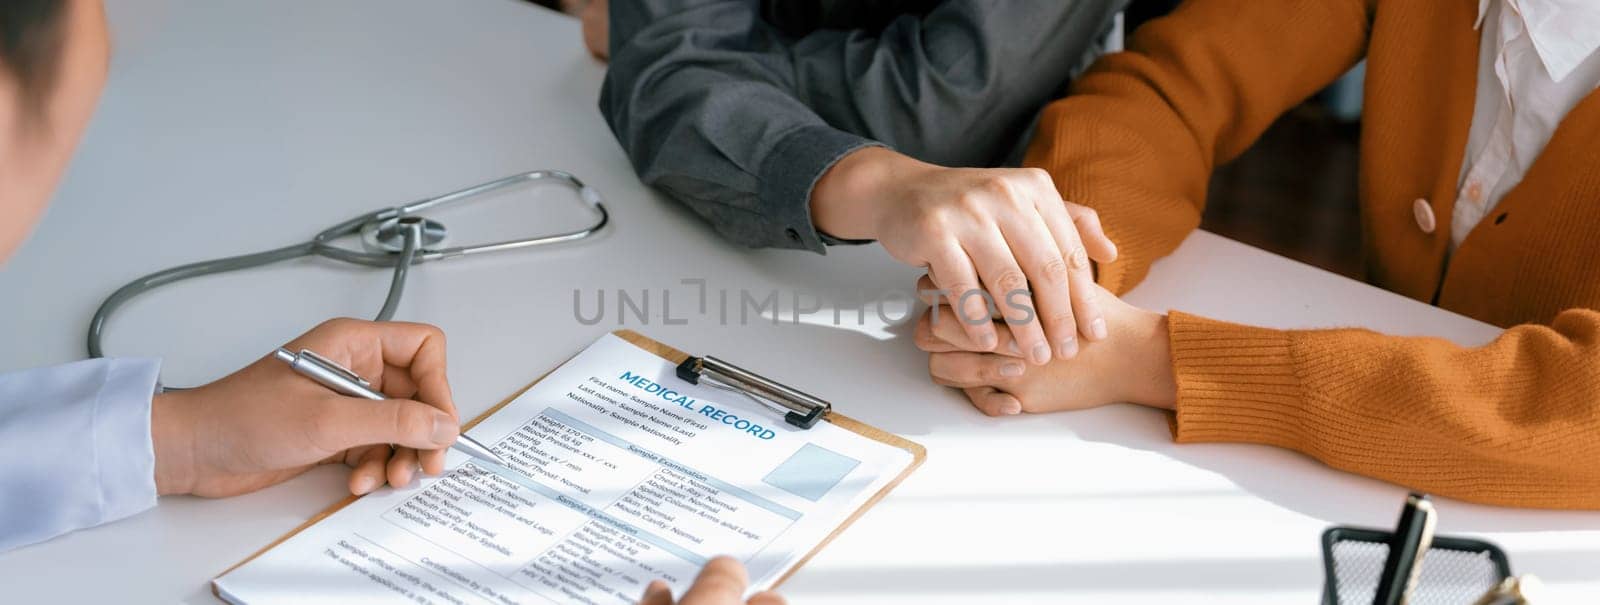 Couple attend fertility or medical consultation with gynecologist at hospital as family planning care for pregnancy. Husband and wife consoling each other through doctor appointment. Panorama Rigid